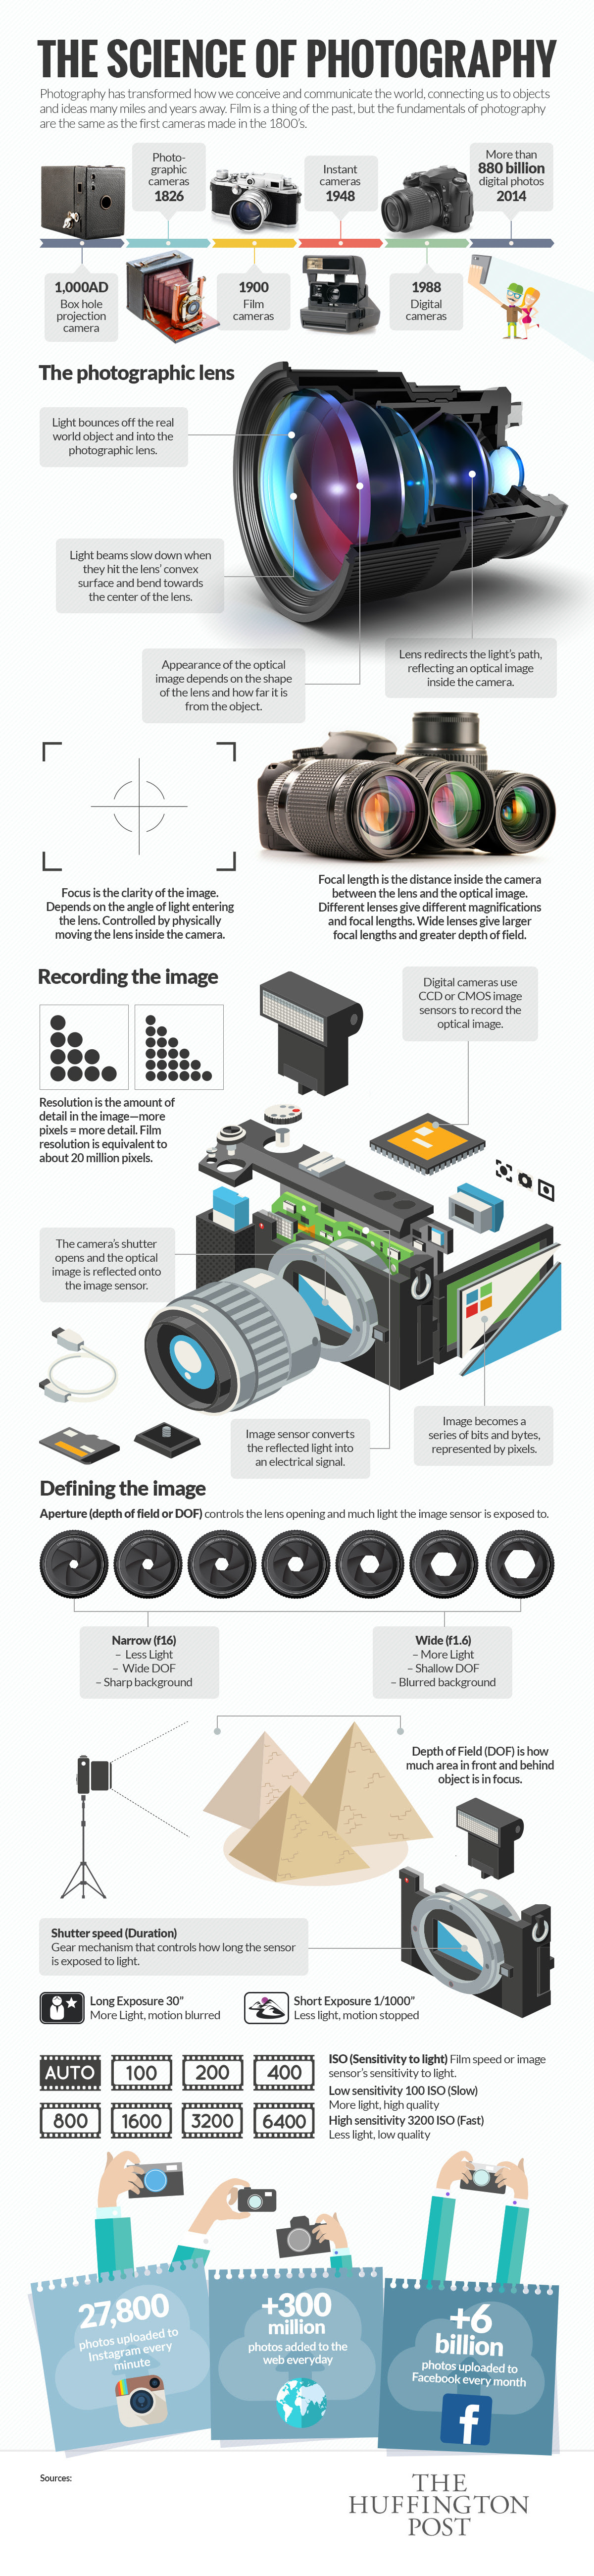 The Science of Photography  infographic  Visualistan